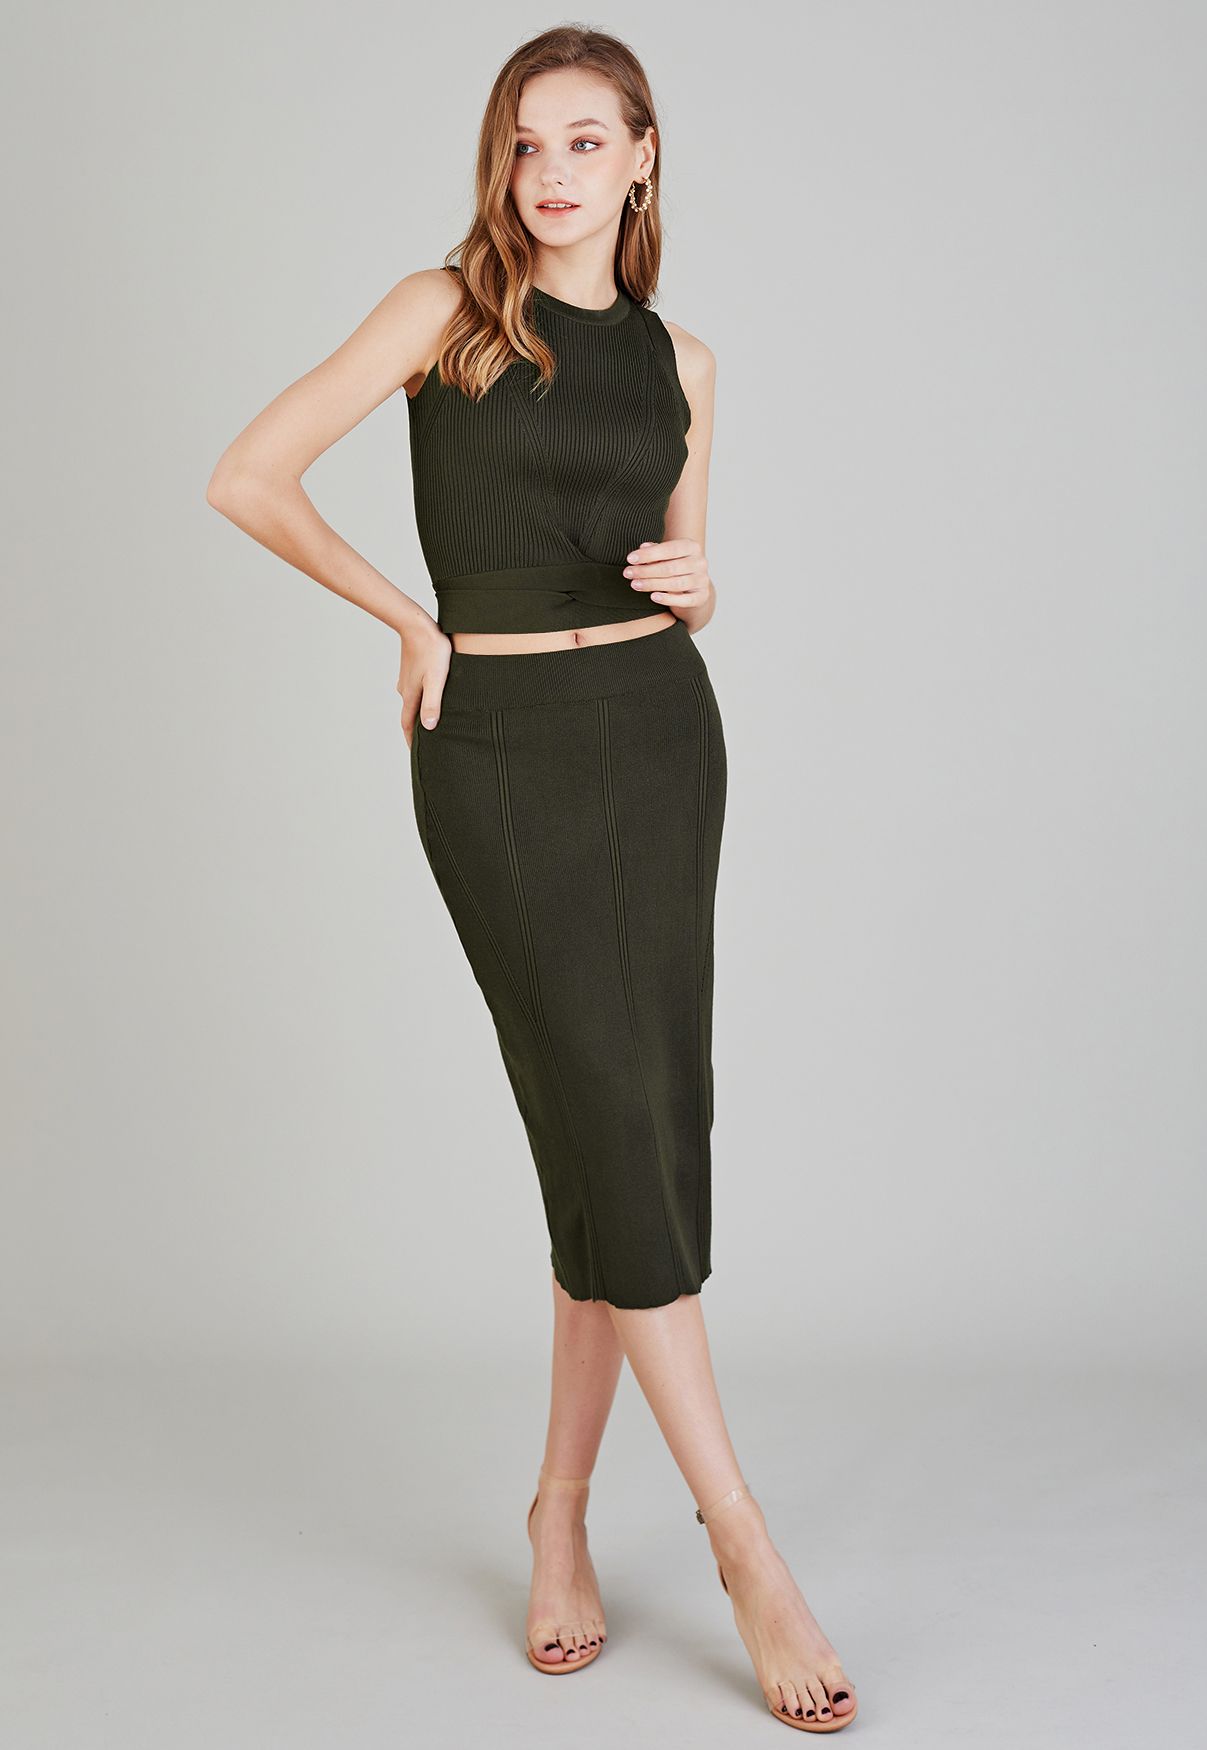 Tie Waist Knit Top and Pencil Skirt Set in Moss Green